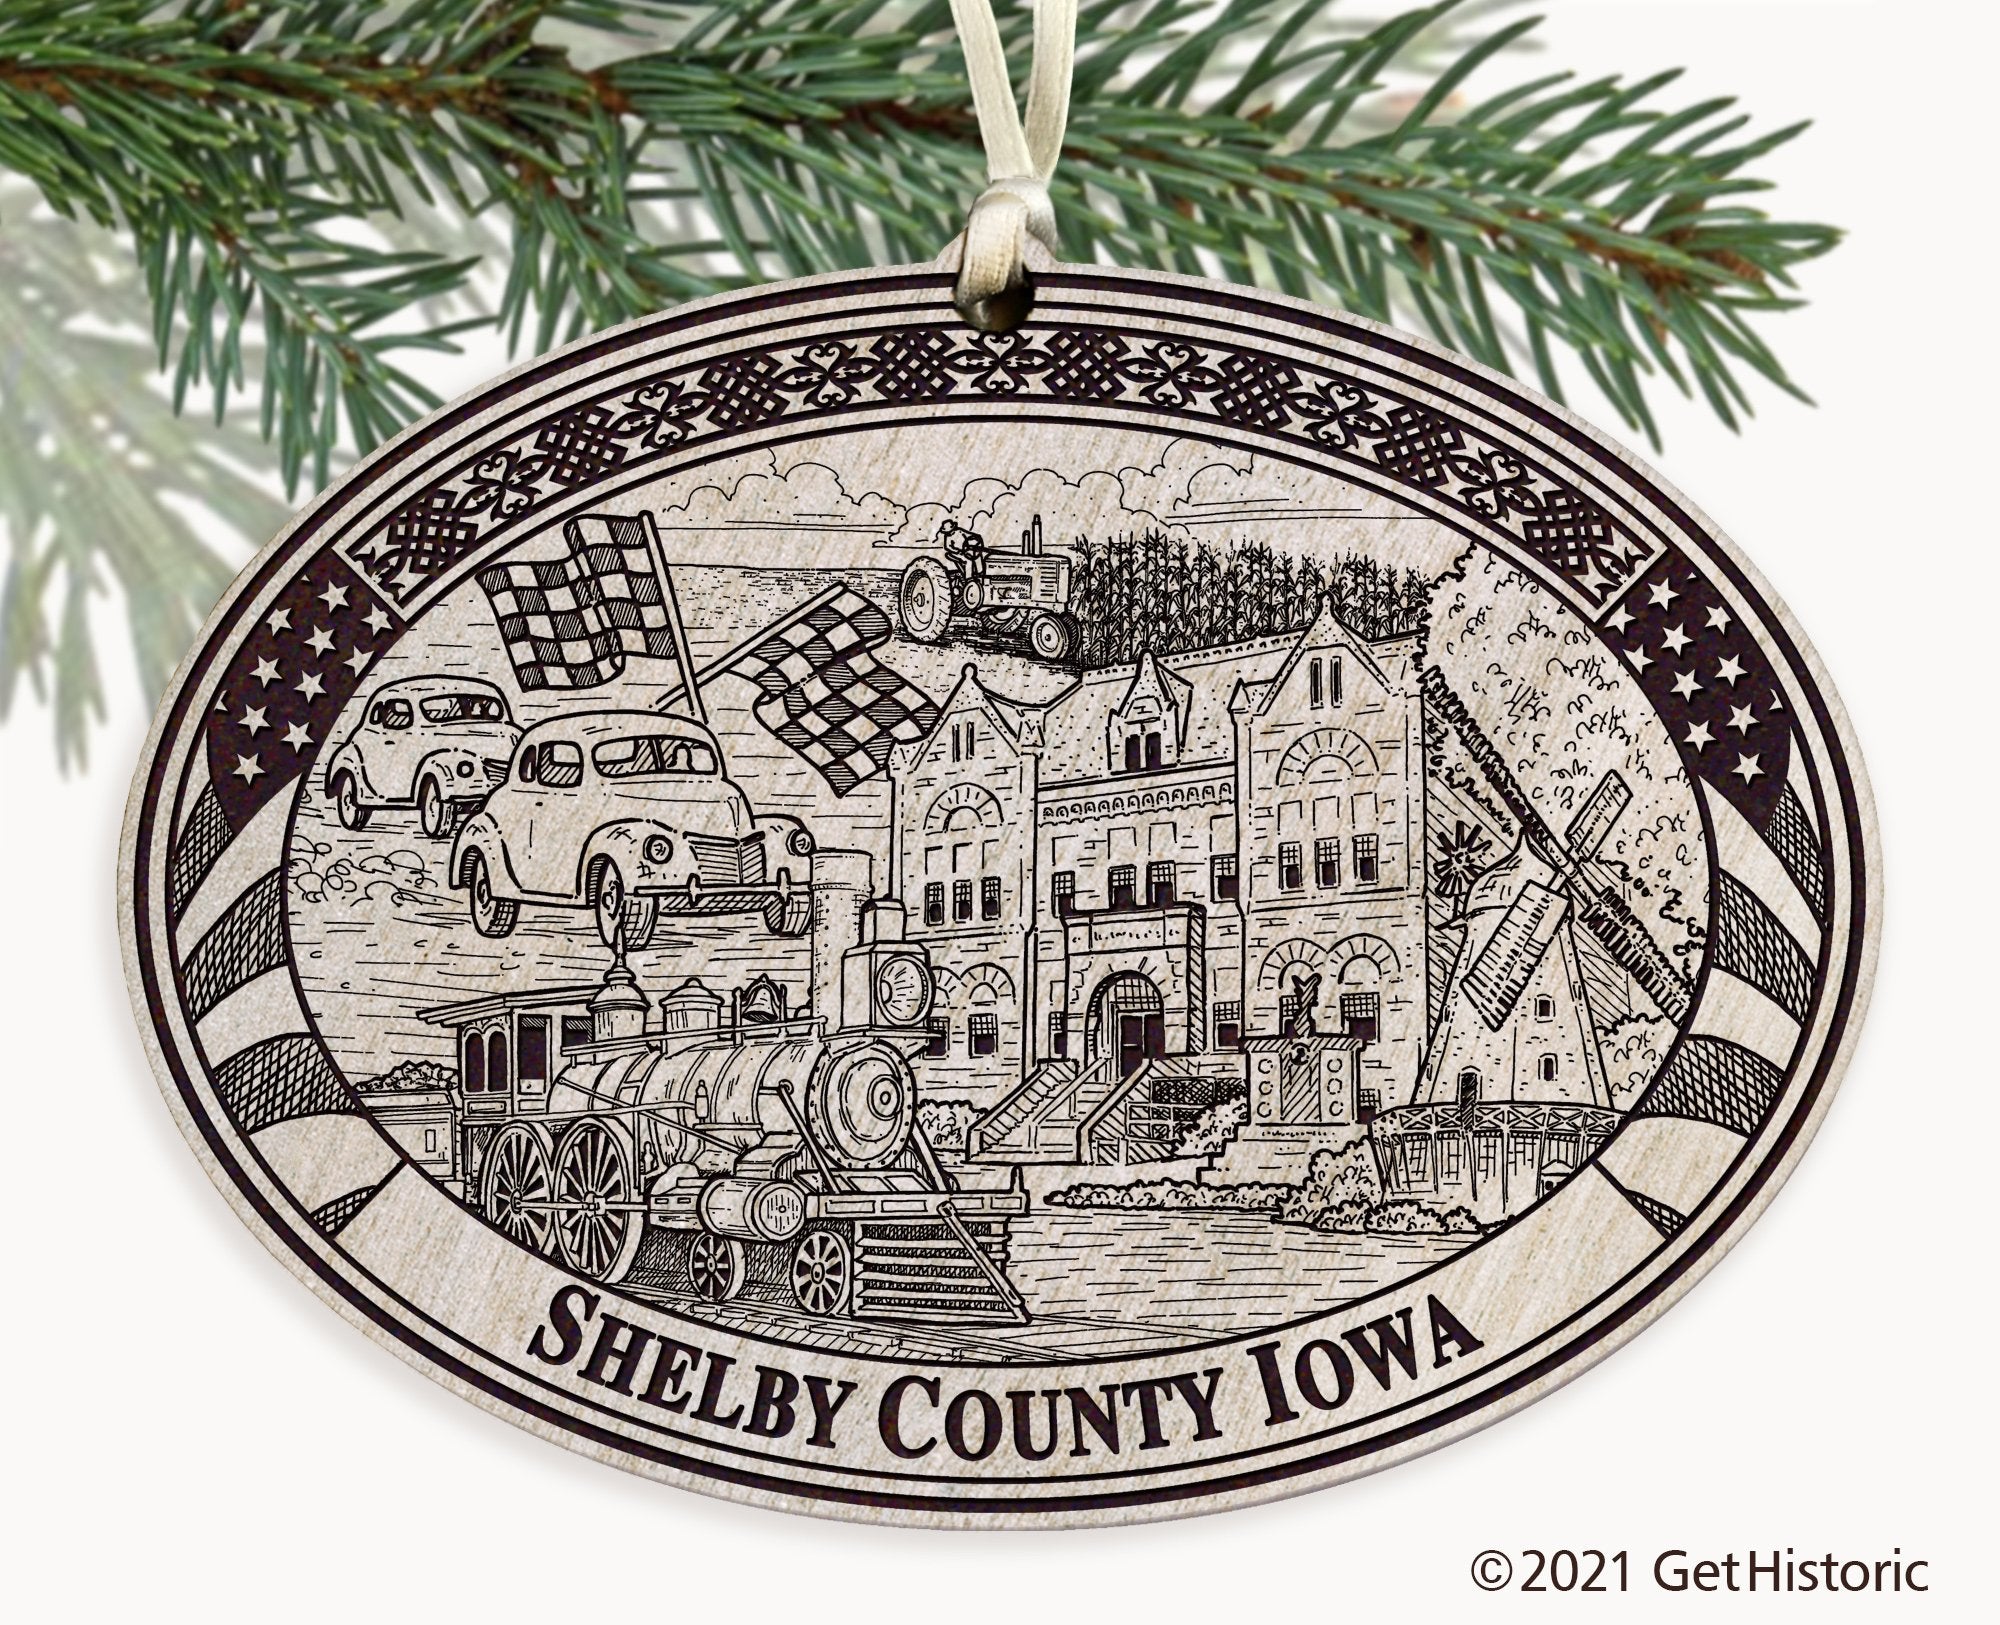 Shelby County Iowa Engraved Ornament